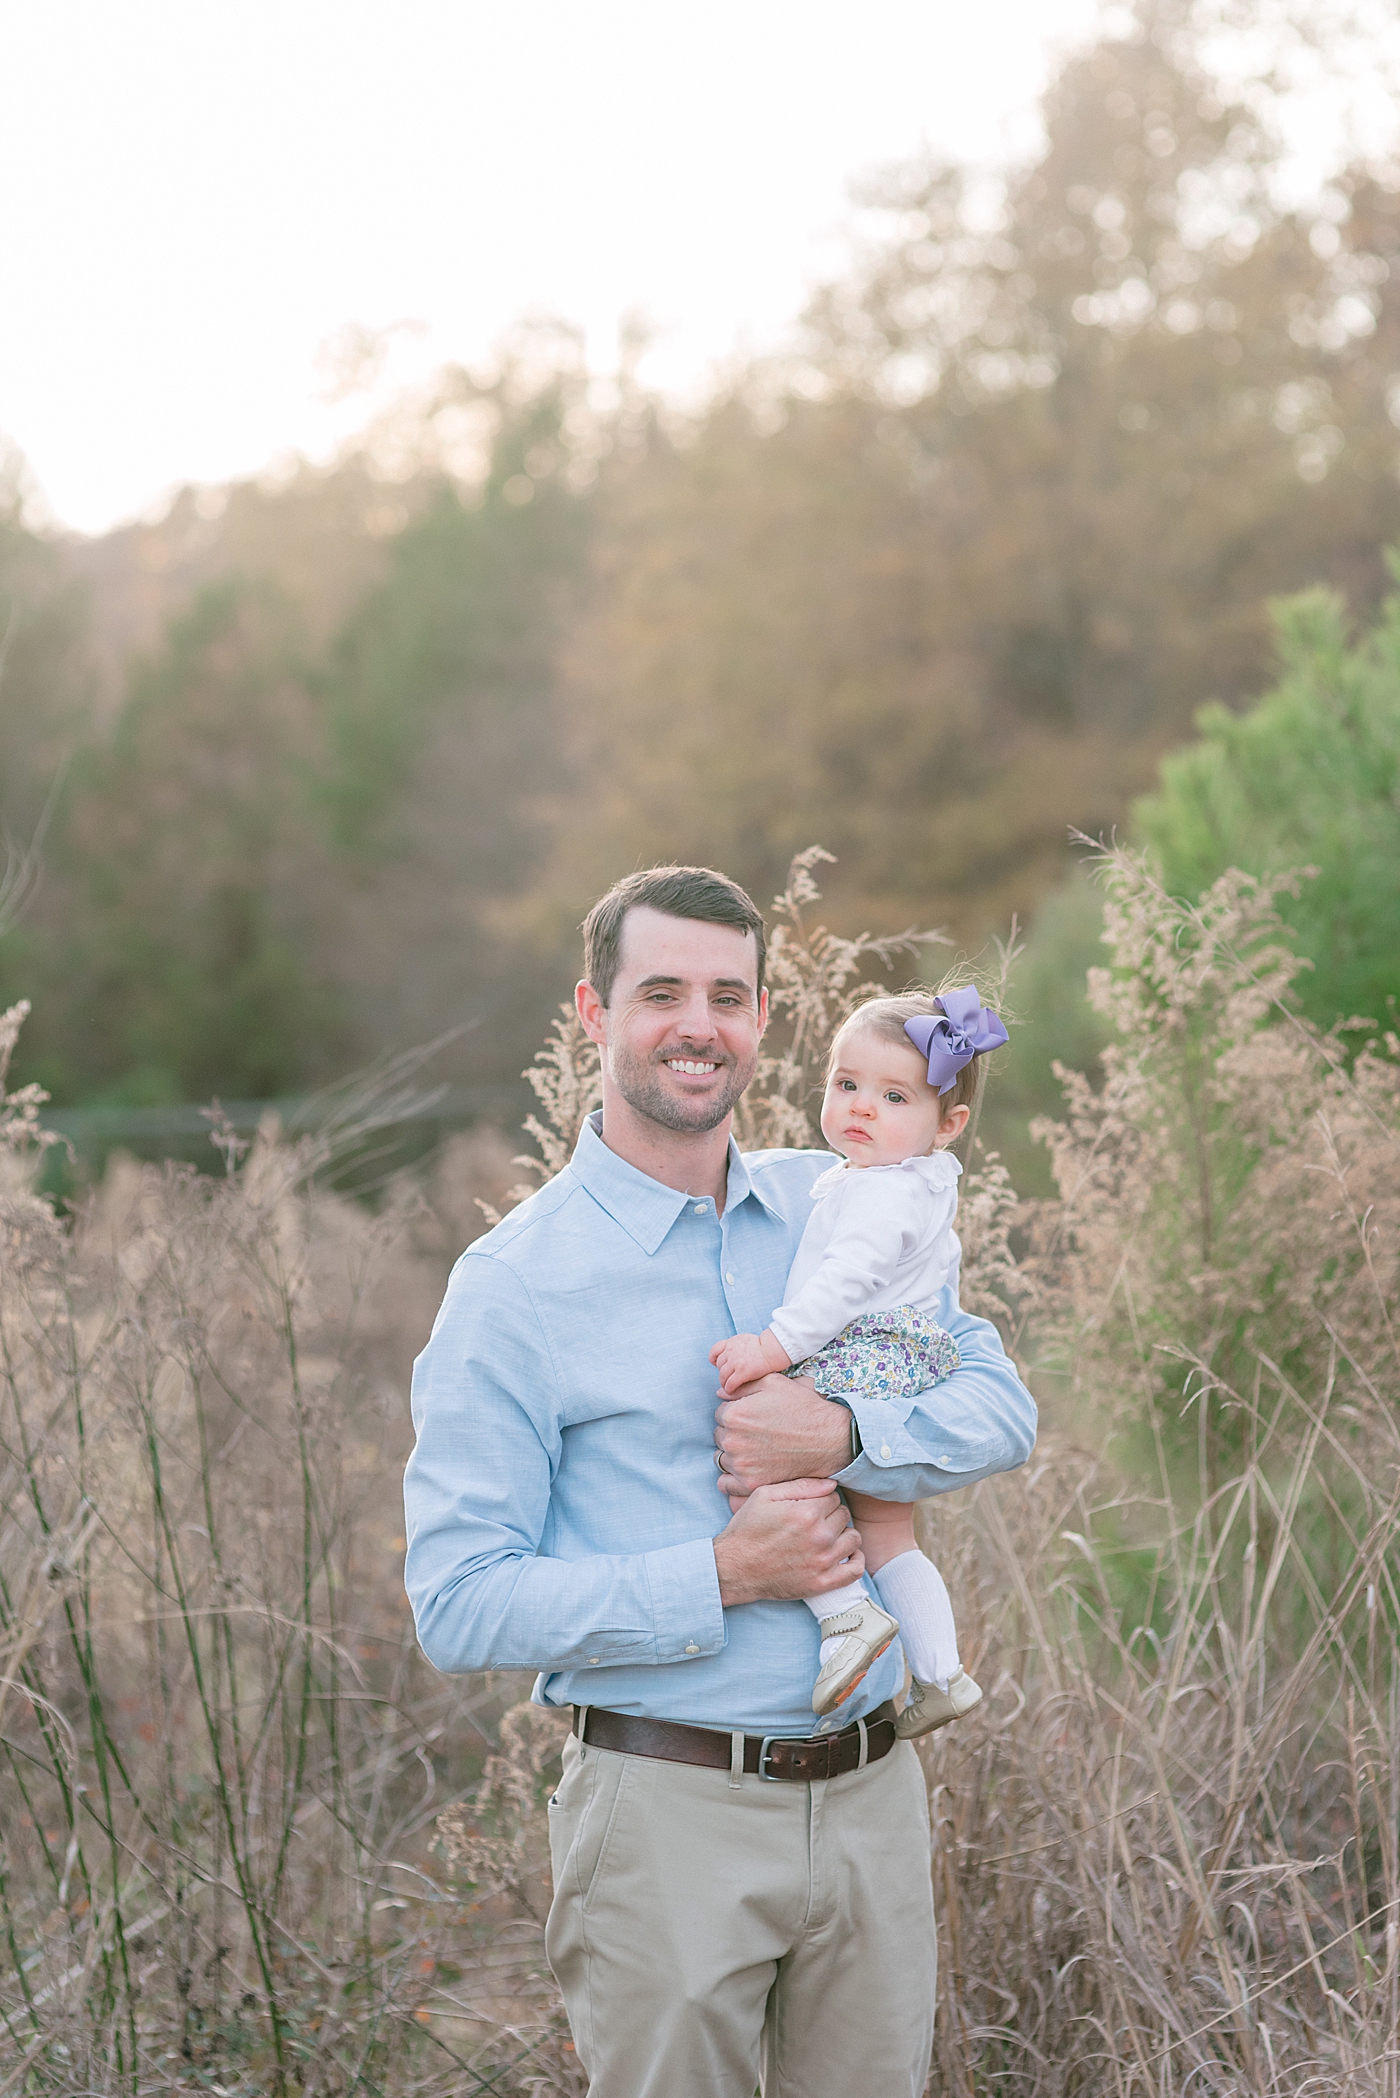 Dad smiling with his baby girl in a field at Milestone Session at Marvin Efird Park | Photo by Anna Wisjo Photography 